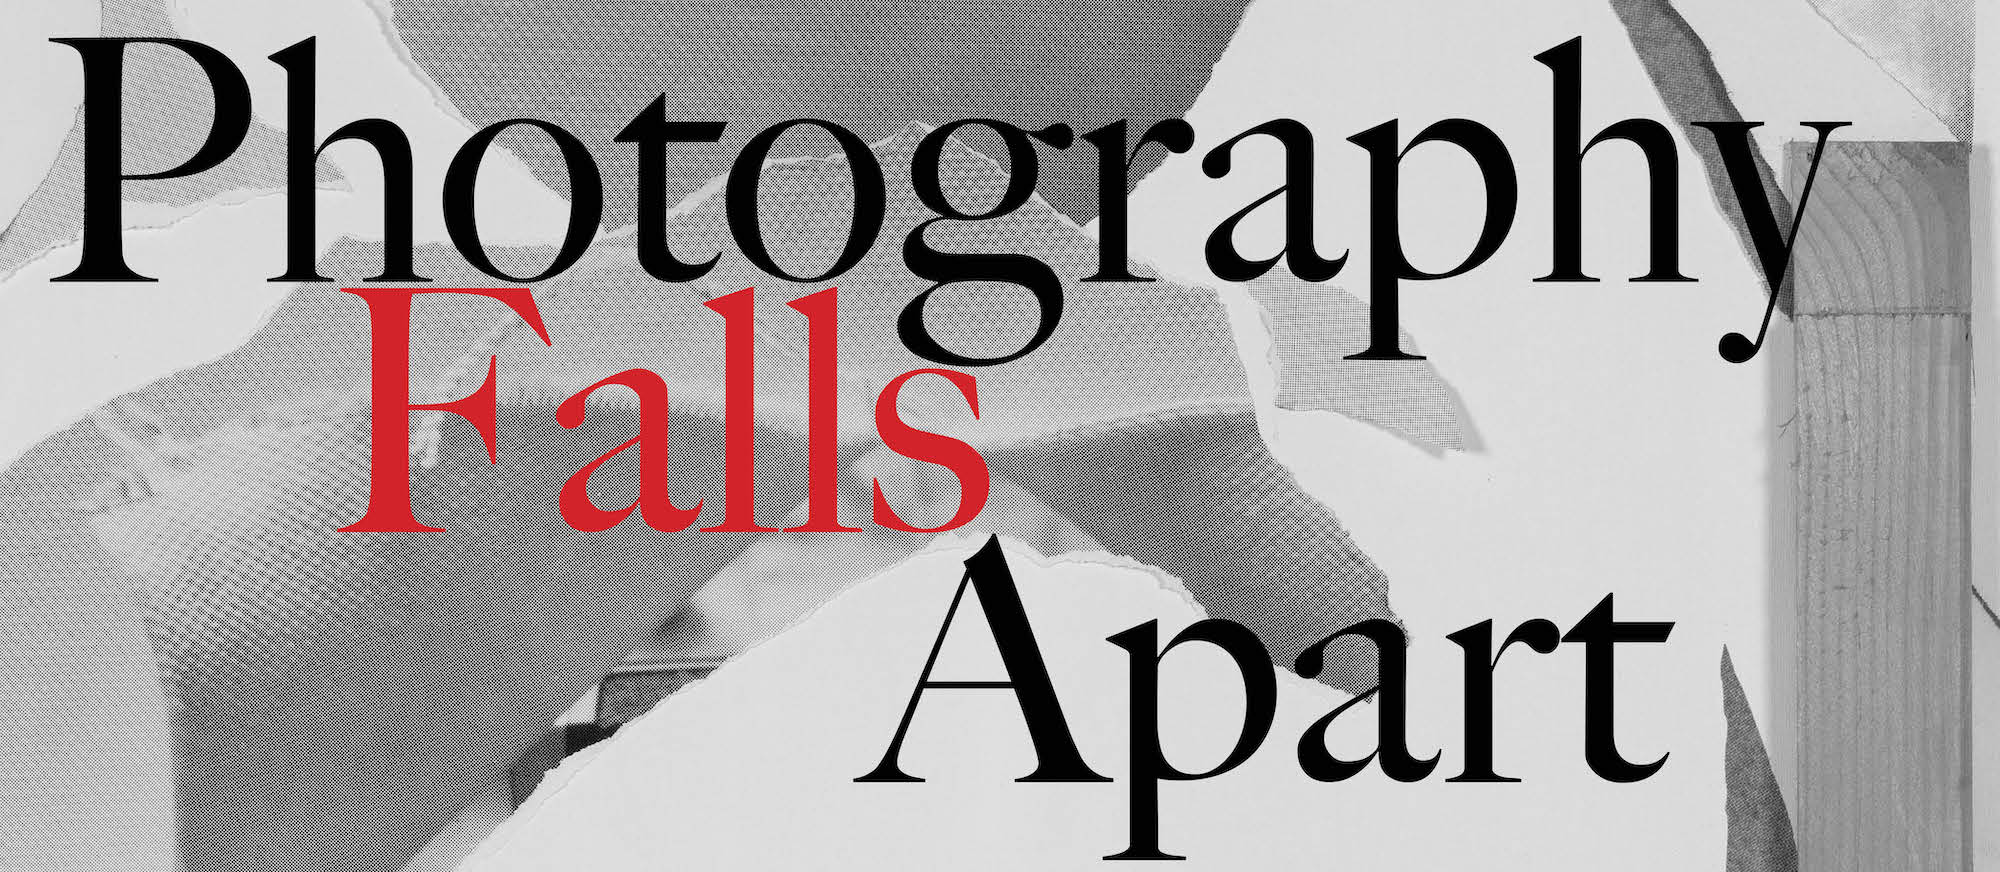 A title screen reading "Photography Falls Apart"